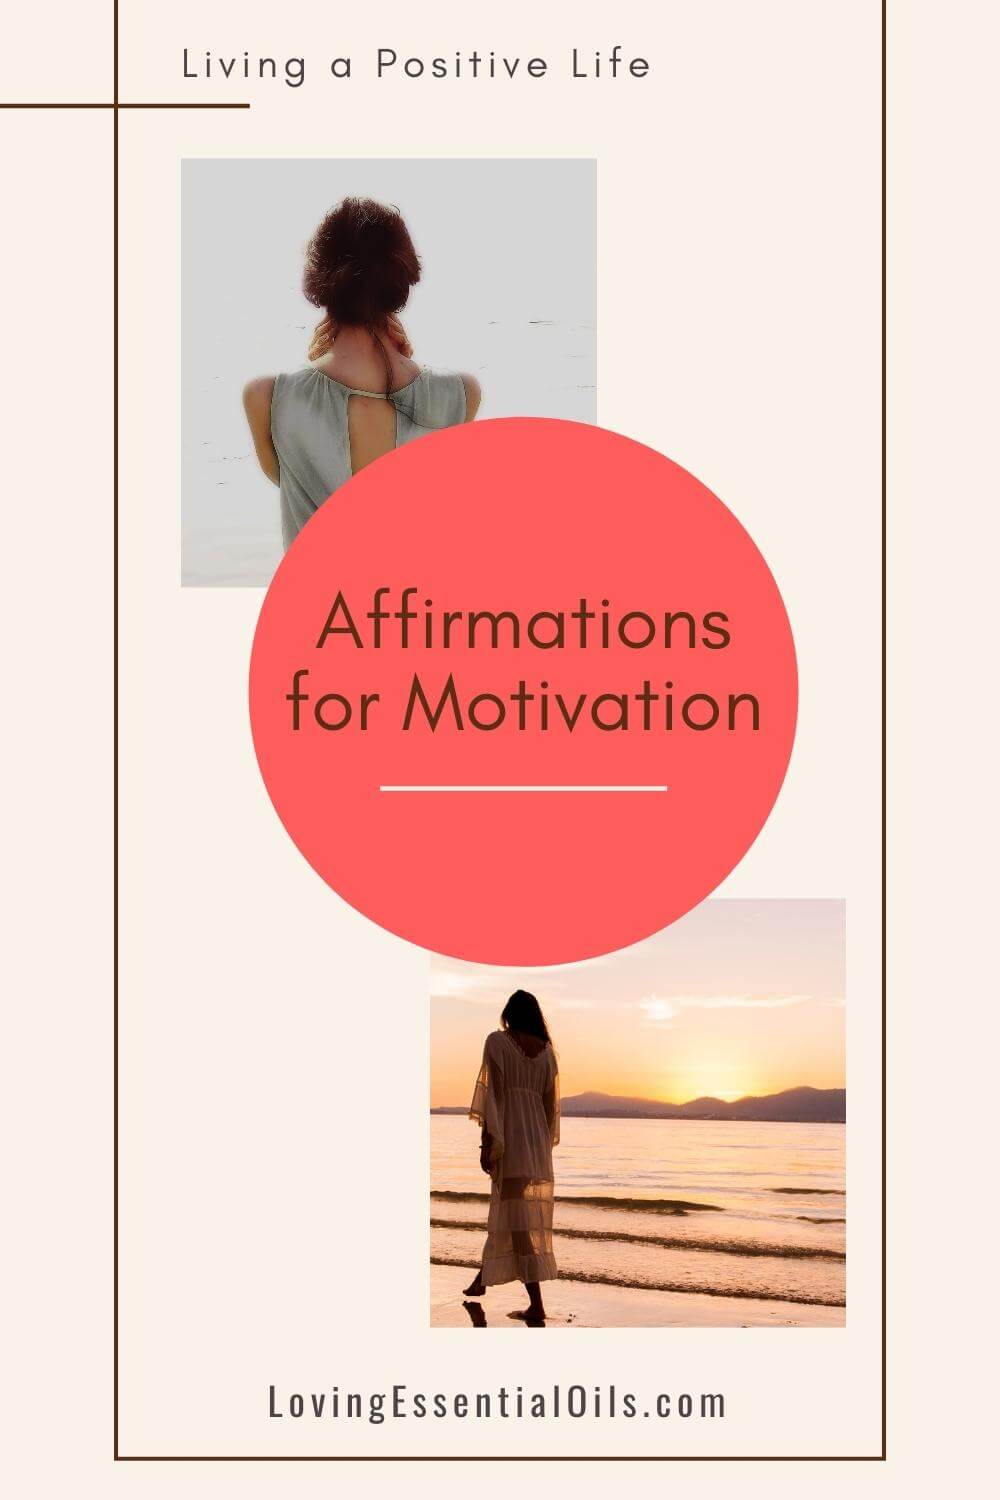 Affirmations for Motivation - Living A Positive Life by Loving Essential Oils | Start with one of these motivational affirmations today!